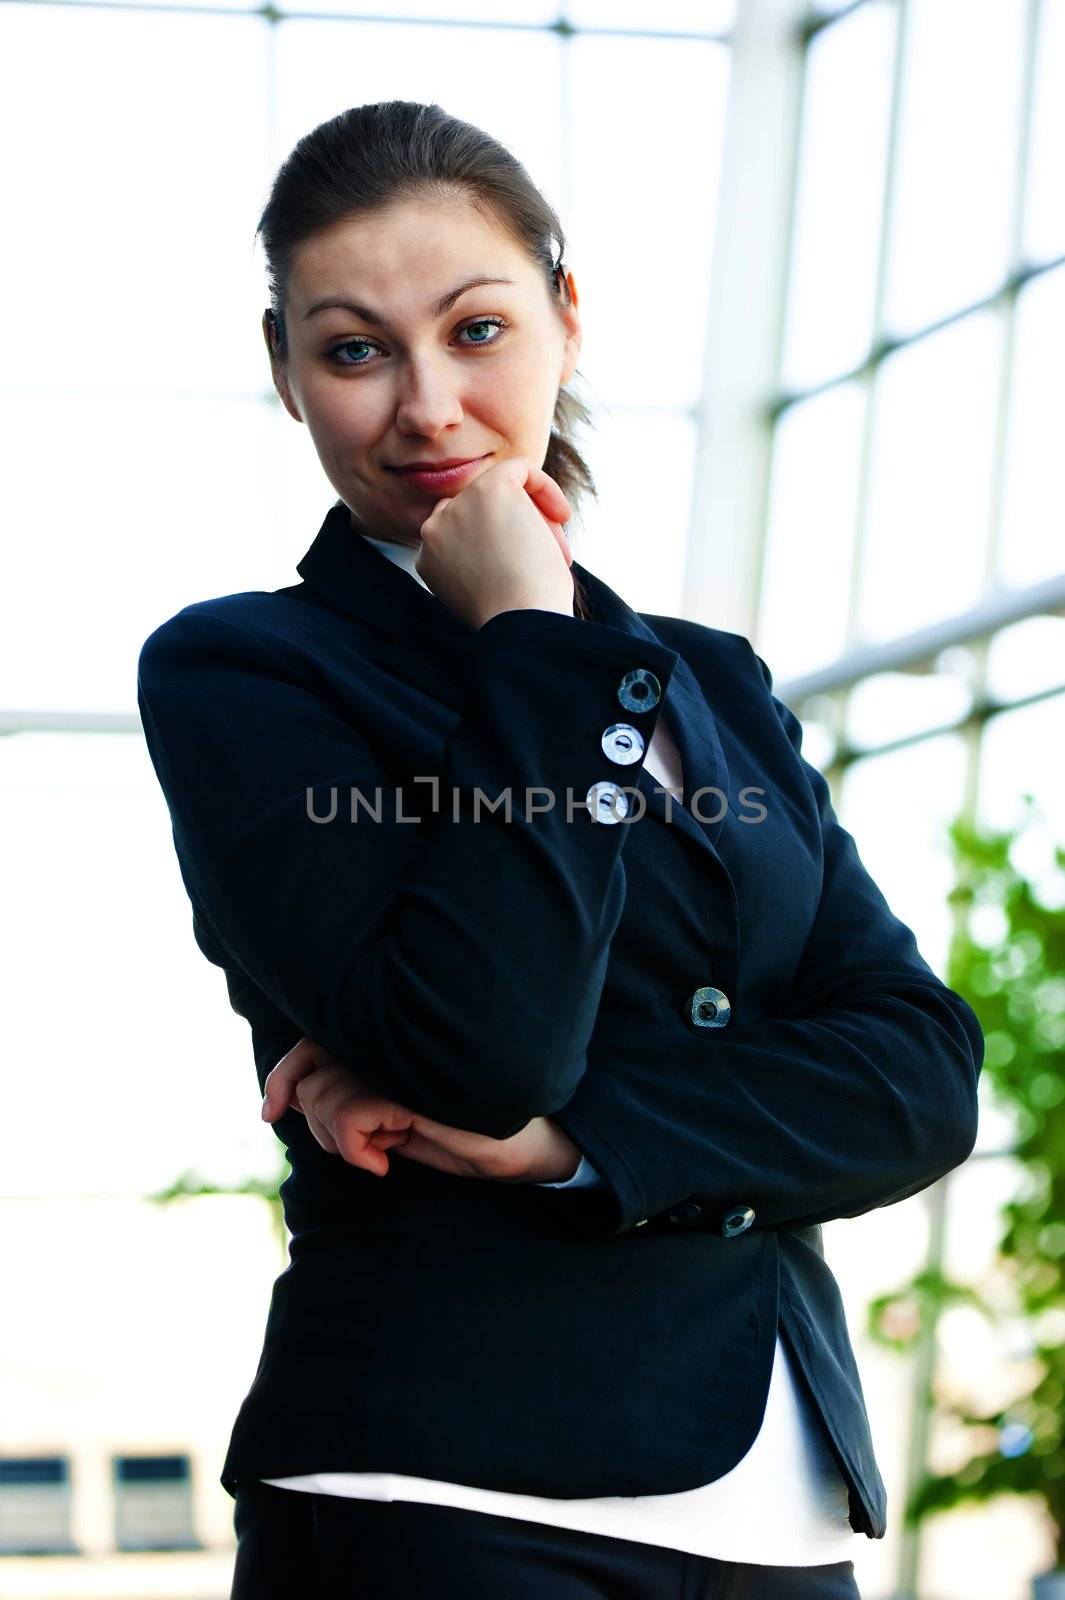 Portrait of successful business woman smiling on the background of a blurred office interior